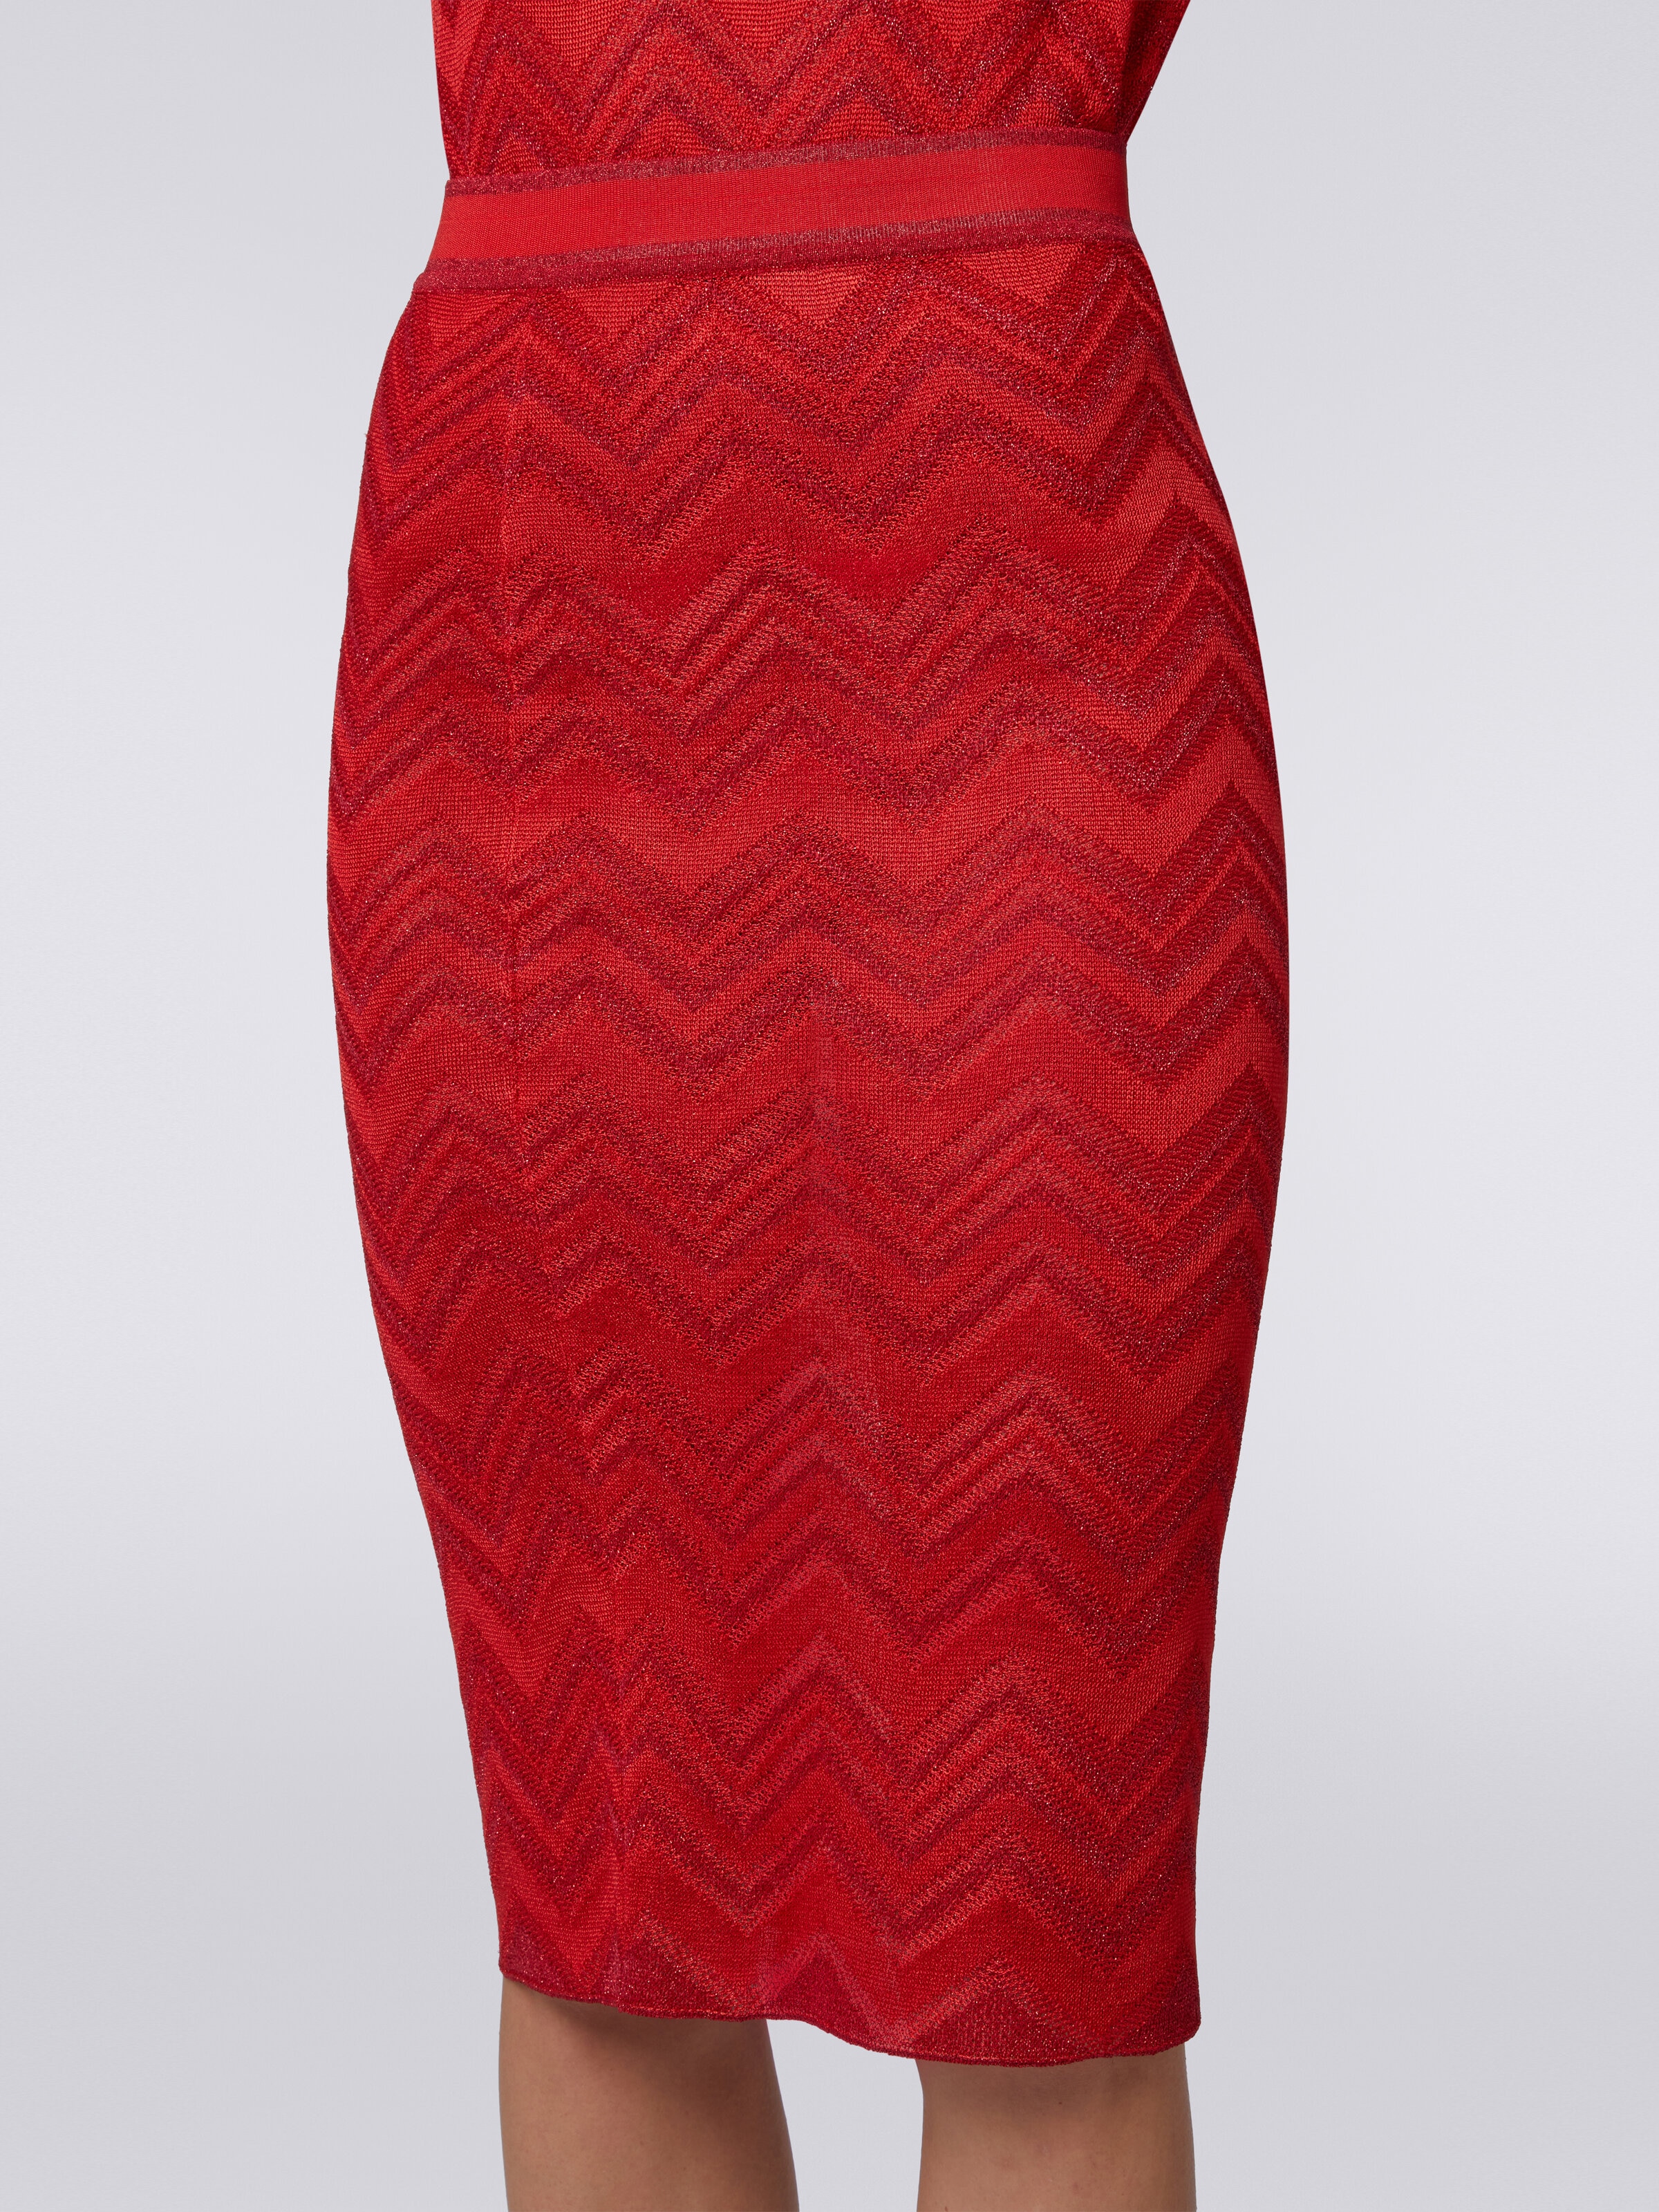 Longuette skirt in zigzag knit with lurex, Red  - 4